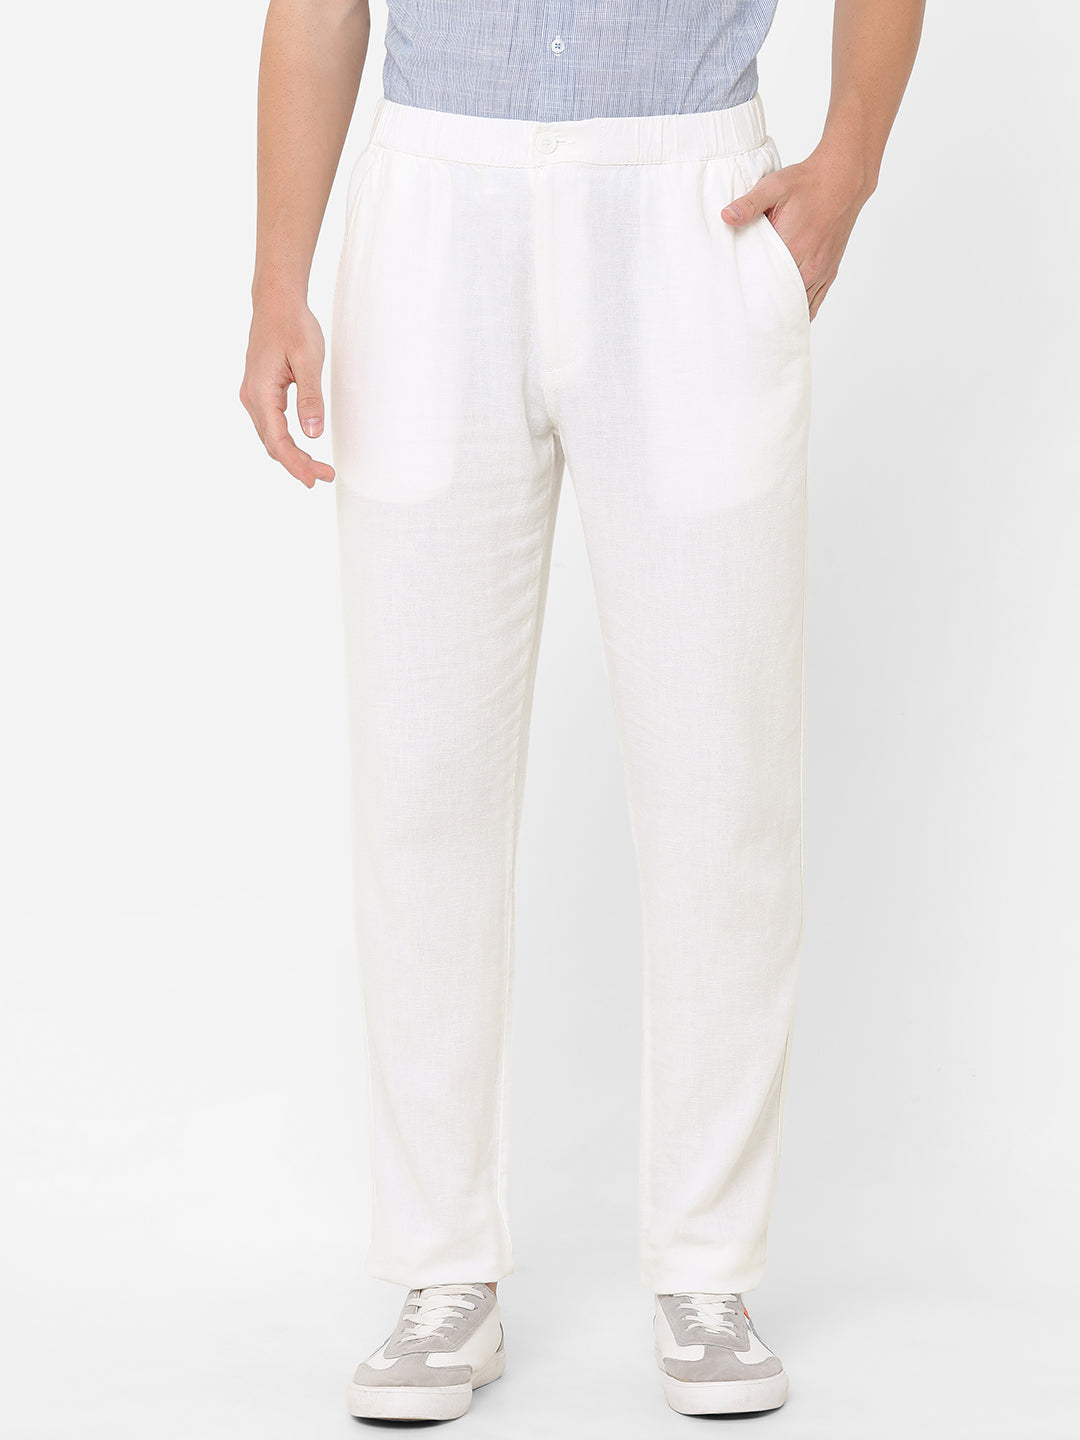 Chinos Narrow Trousers - Buy Chinos Narrow Trousers online in India